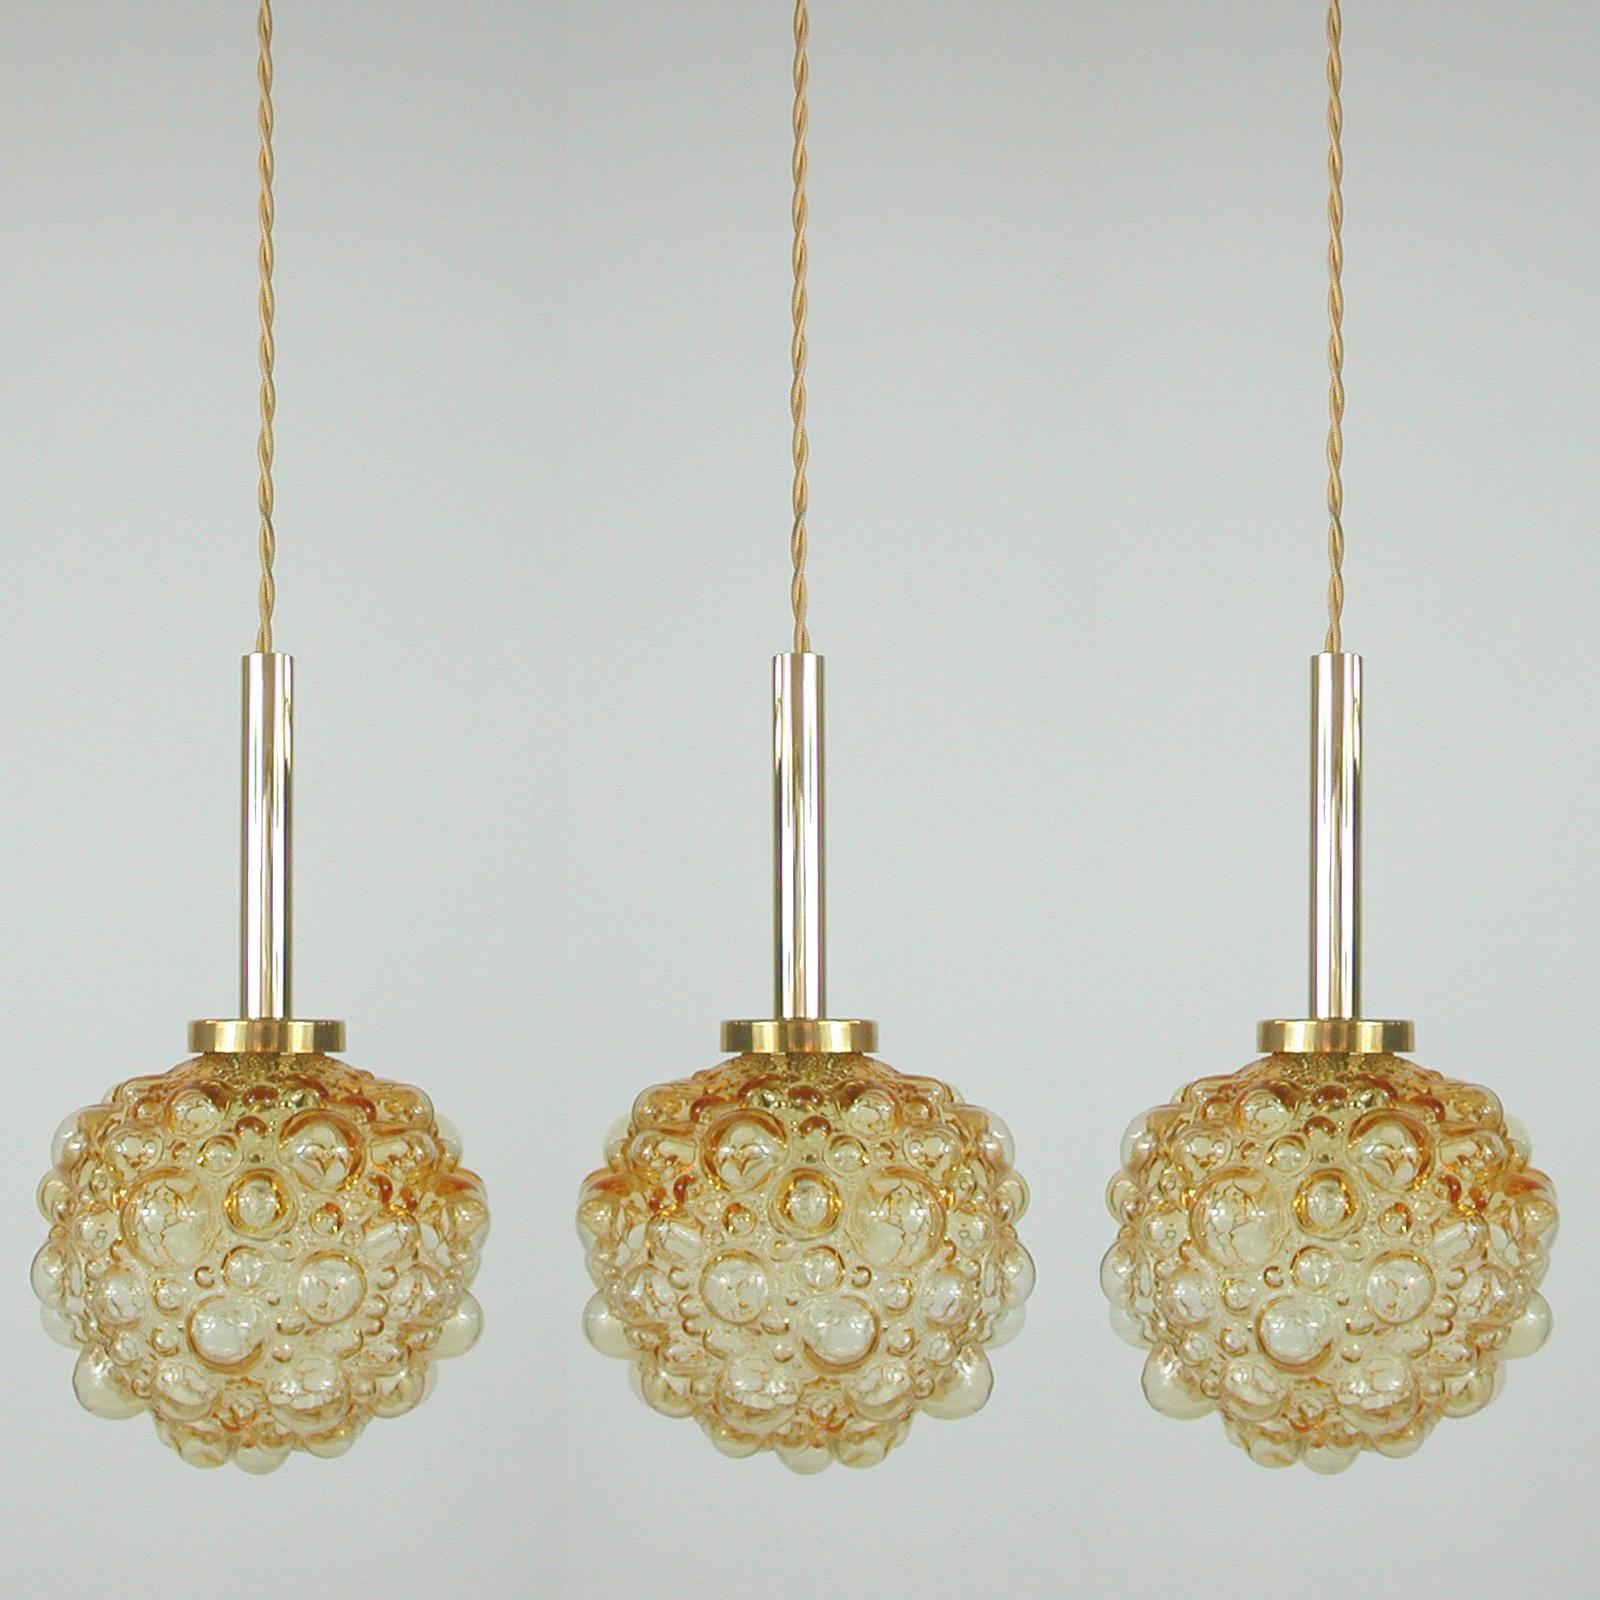 This Space Age pendant light was designed and manufactured in Germany in the 1960s. It features an amber bubble glass lampshade and has got a brass cylinder. The lamp is sold without canopy.

The light has been rewired with new amber / gold